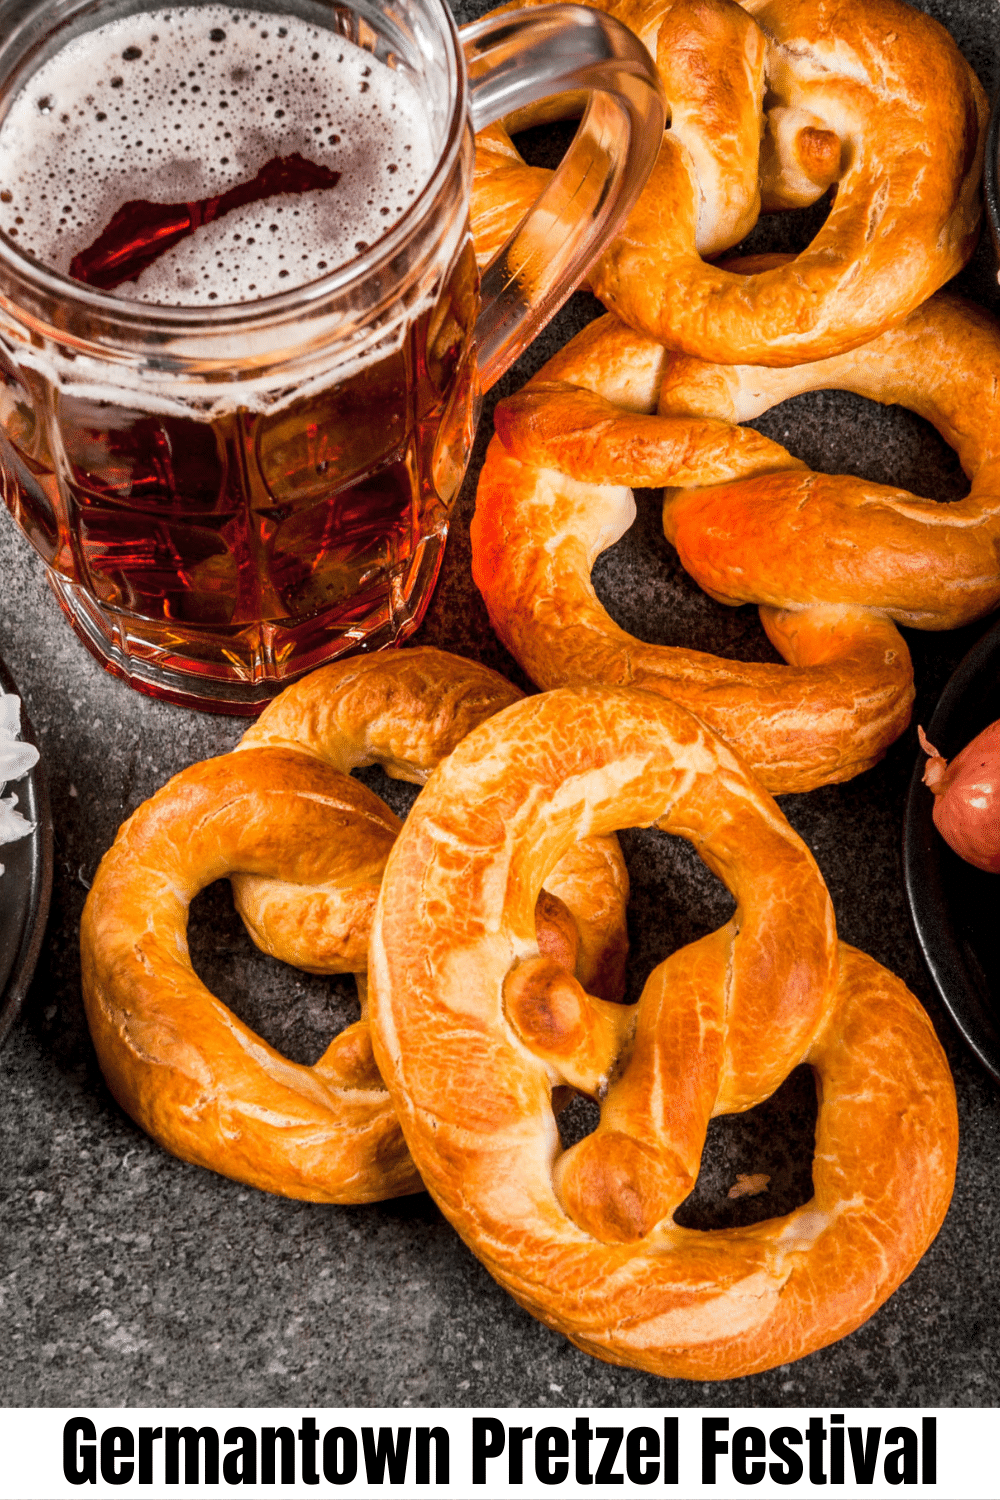 vertical image for pinterest with a photo of three soft pretzels with salt sprinkled on them. On a wooden surface with a clear glass of beer. A white strip at the top has the text Germantown Pretzel Festival